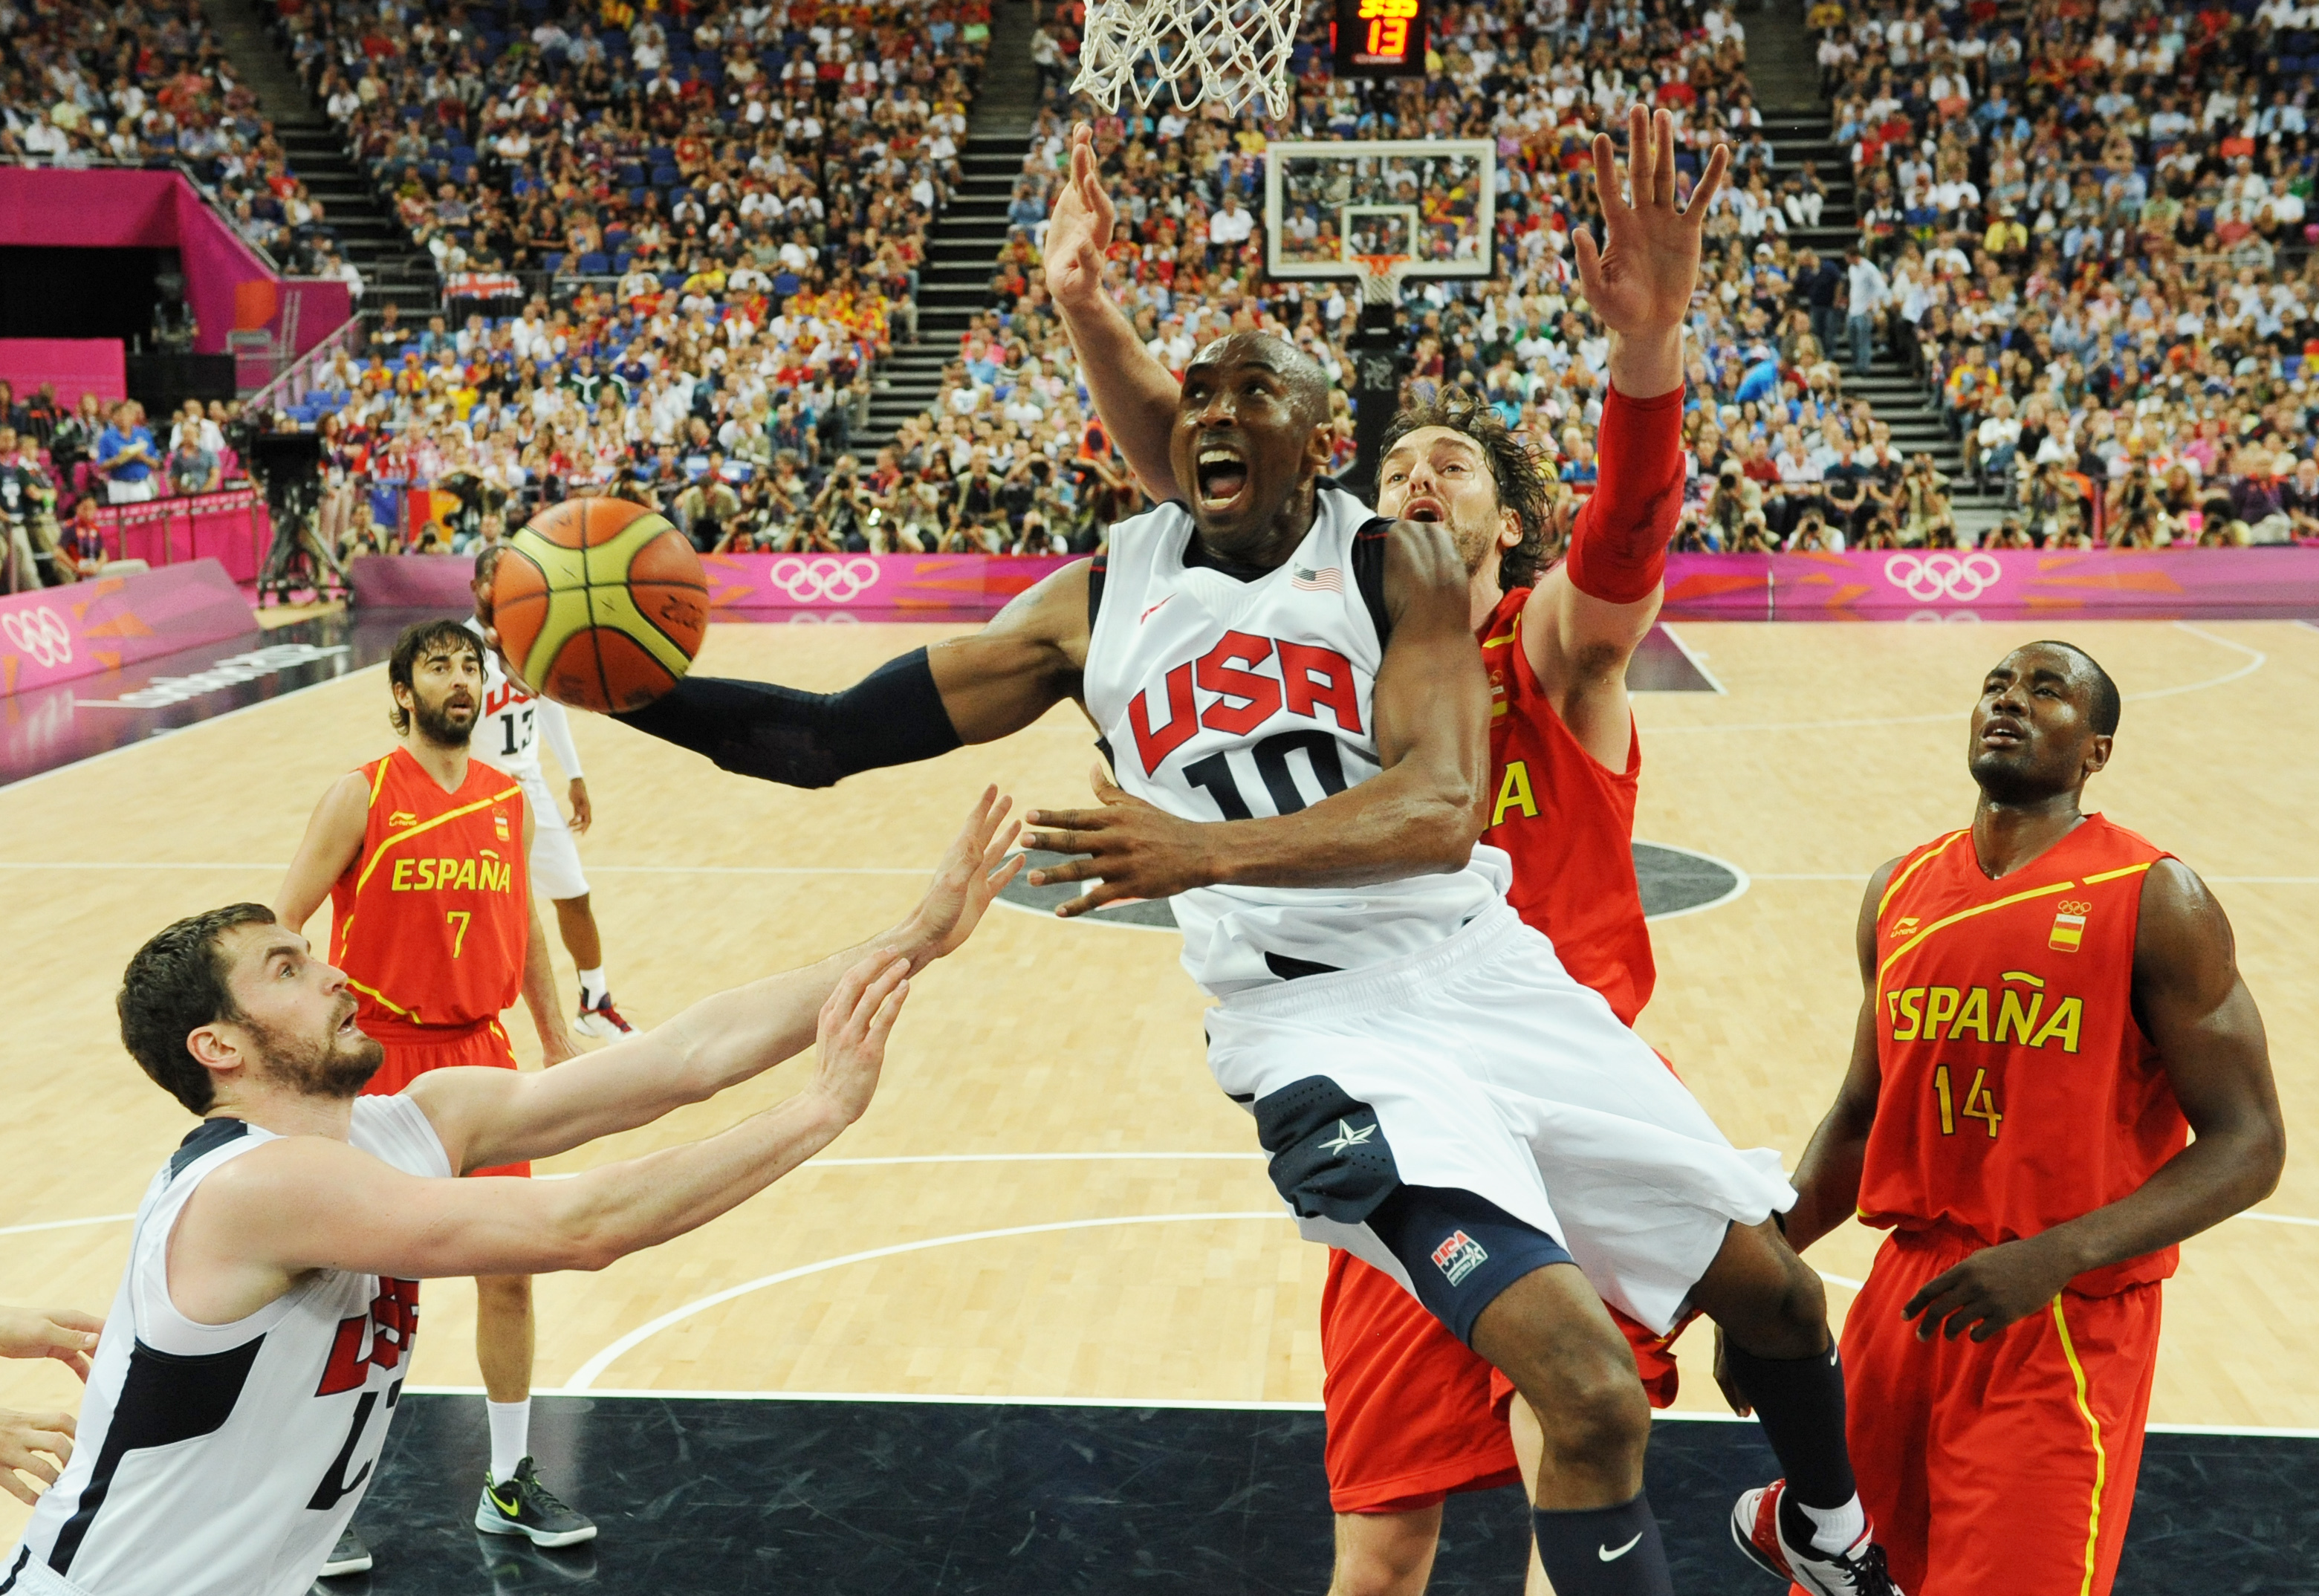 The Best of Kobe Bryant at the Olympic Games 